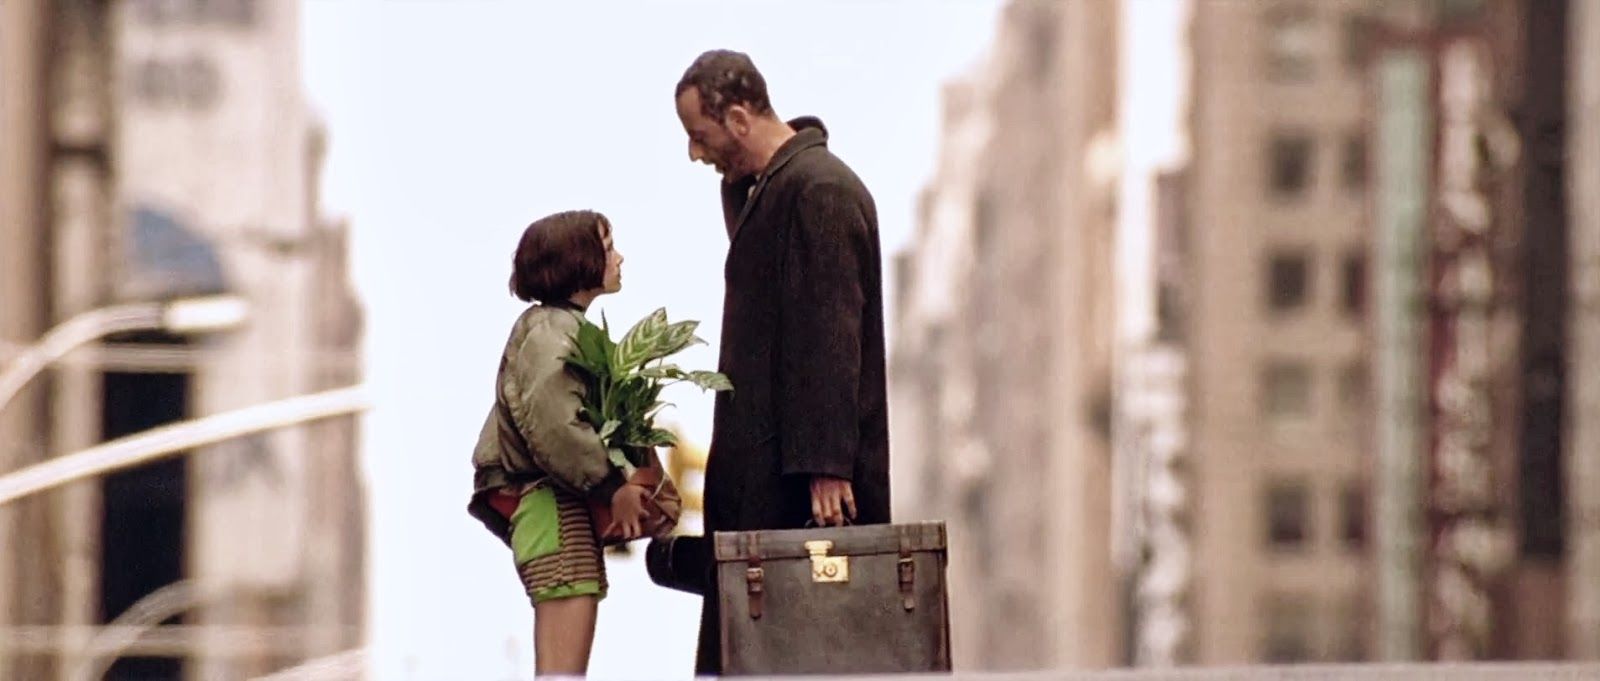 The Professional Wallpapers - Leon The Professional Gif - 1600x681 Wallpaper  